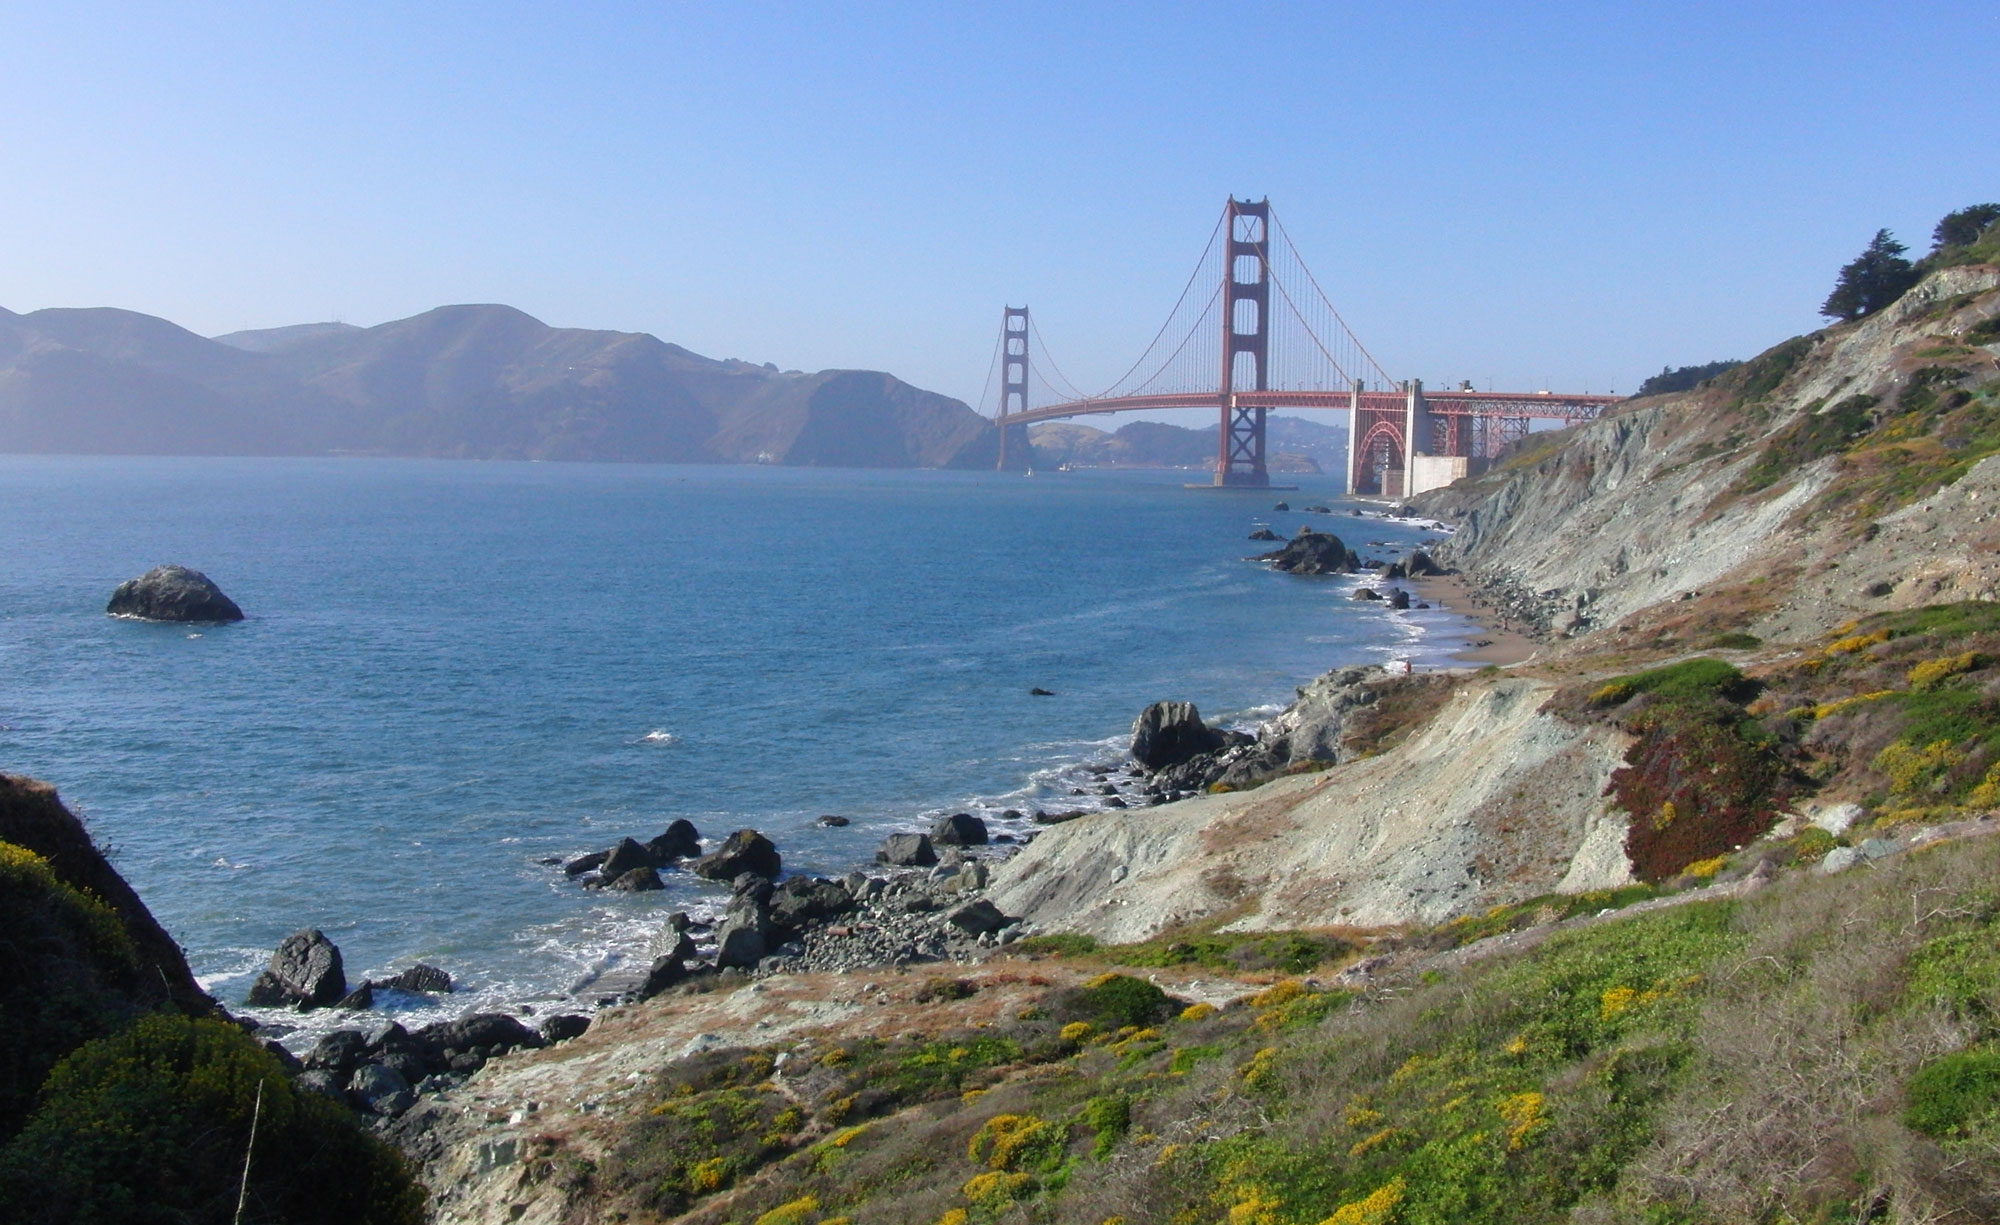 Photograph of bluffs by the side of the ocean in the Presidio, a park in San Francisco near the Golden Gate Bridge. In the foreground, greenish bluffs slope toward blue water. In the background, the Golden Gate Bridge spans the entrance to San Francisco Bay.